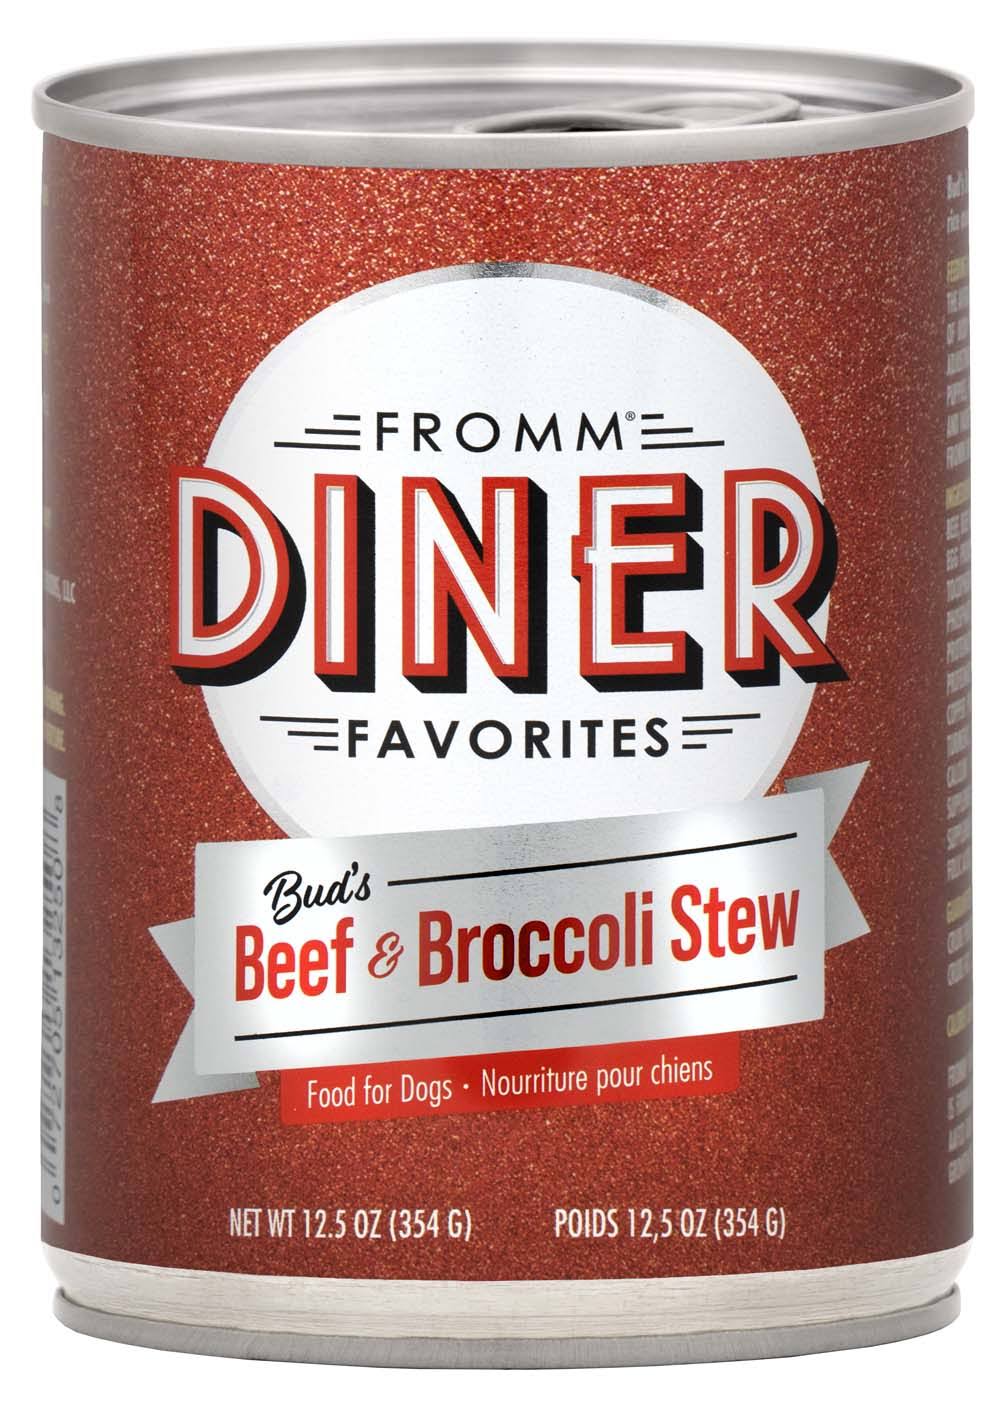 Fromm Diner Favorites Bud's Beef & Broccoli Stew Canned Dog Food